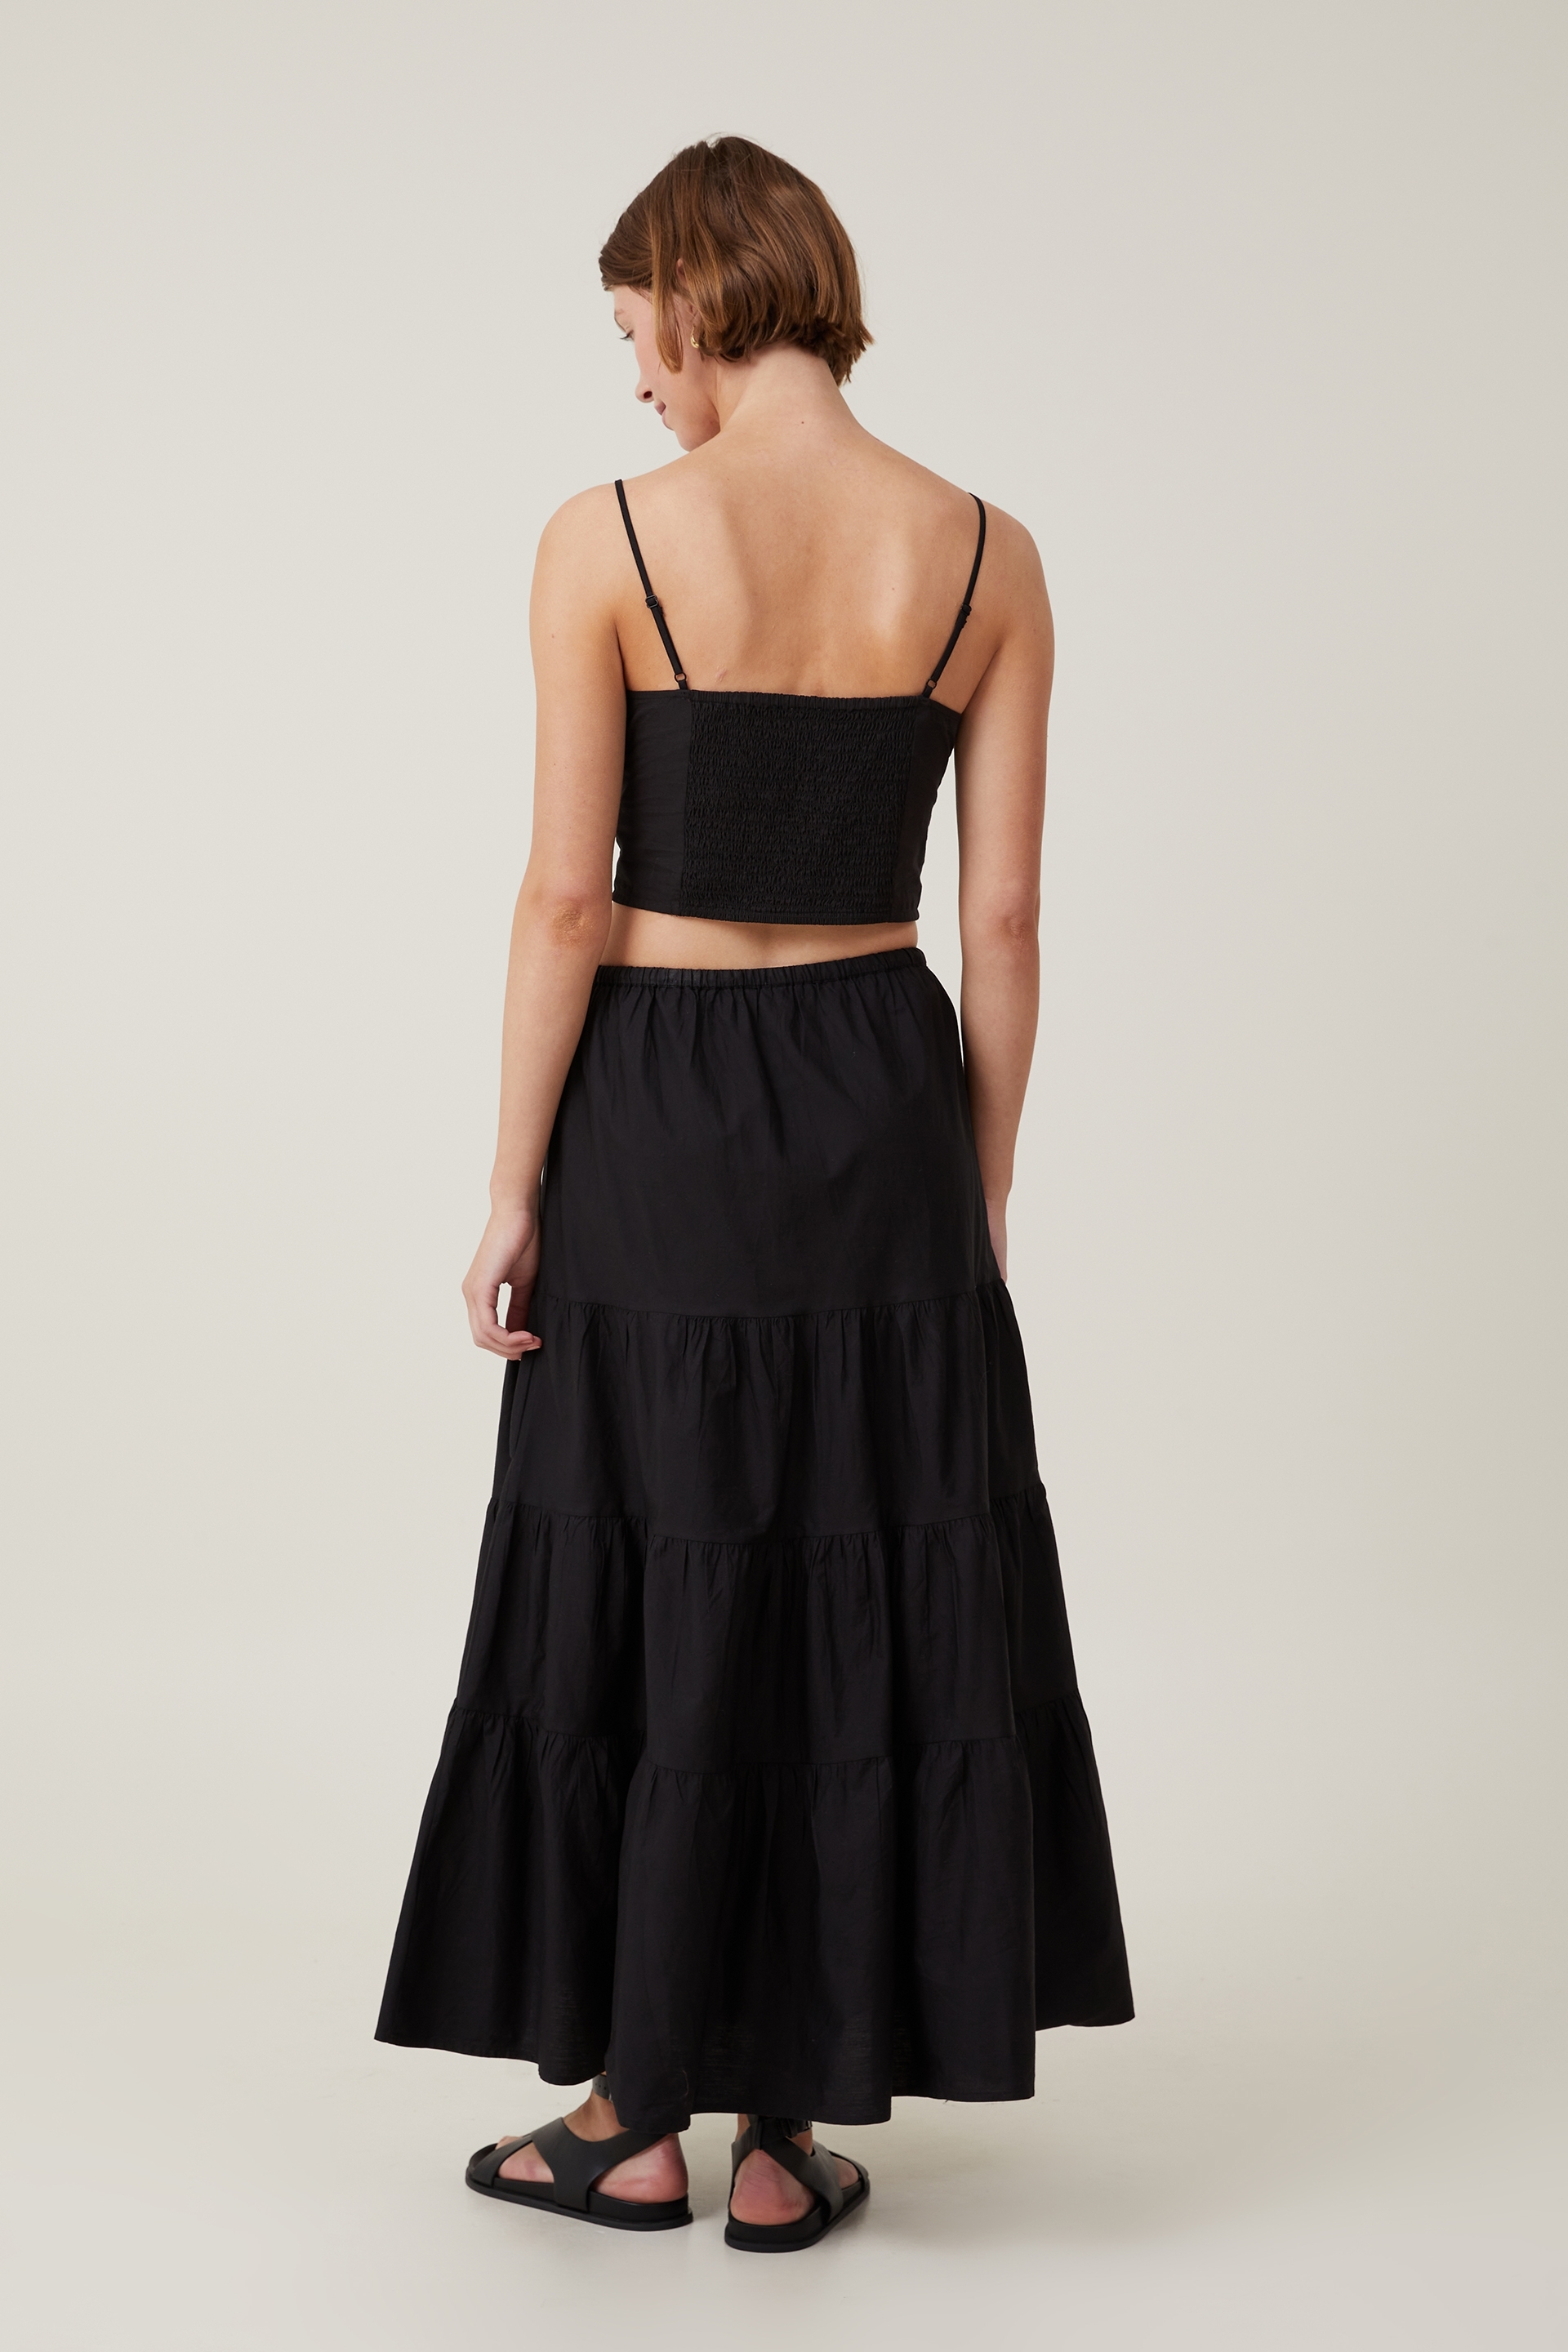 Maxi Skirts | Afterpay | Zip Pay | Sezzle | LayBuy